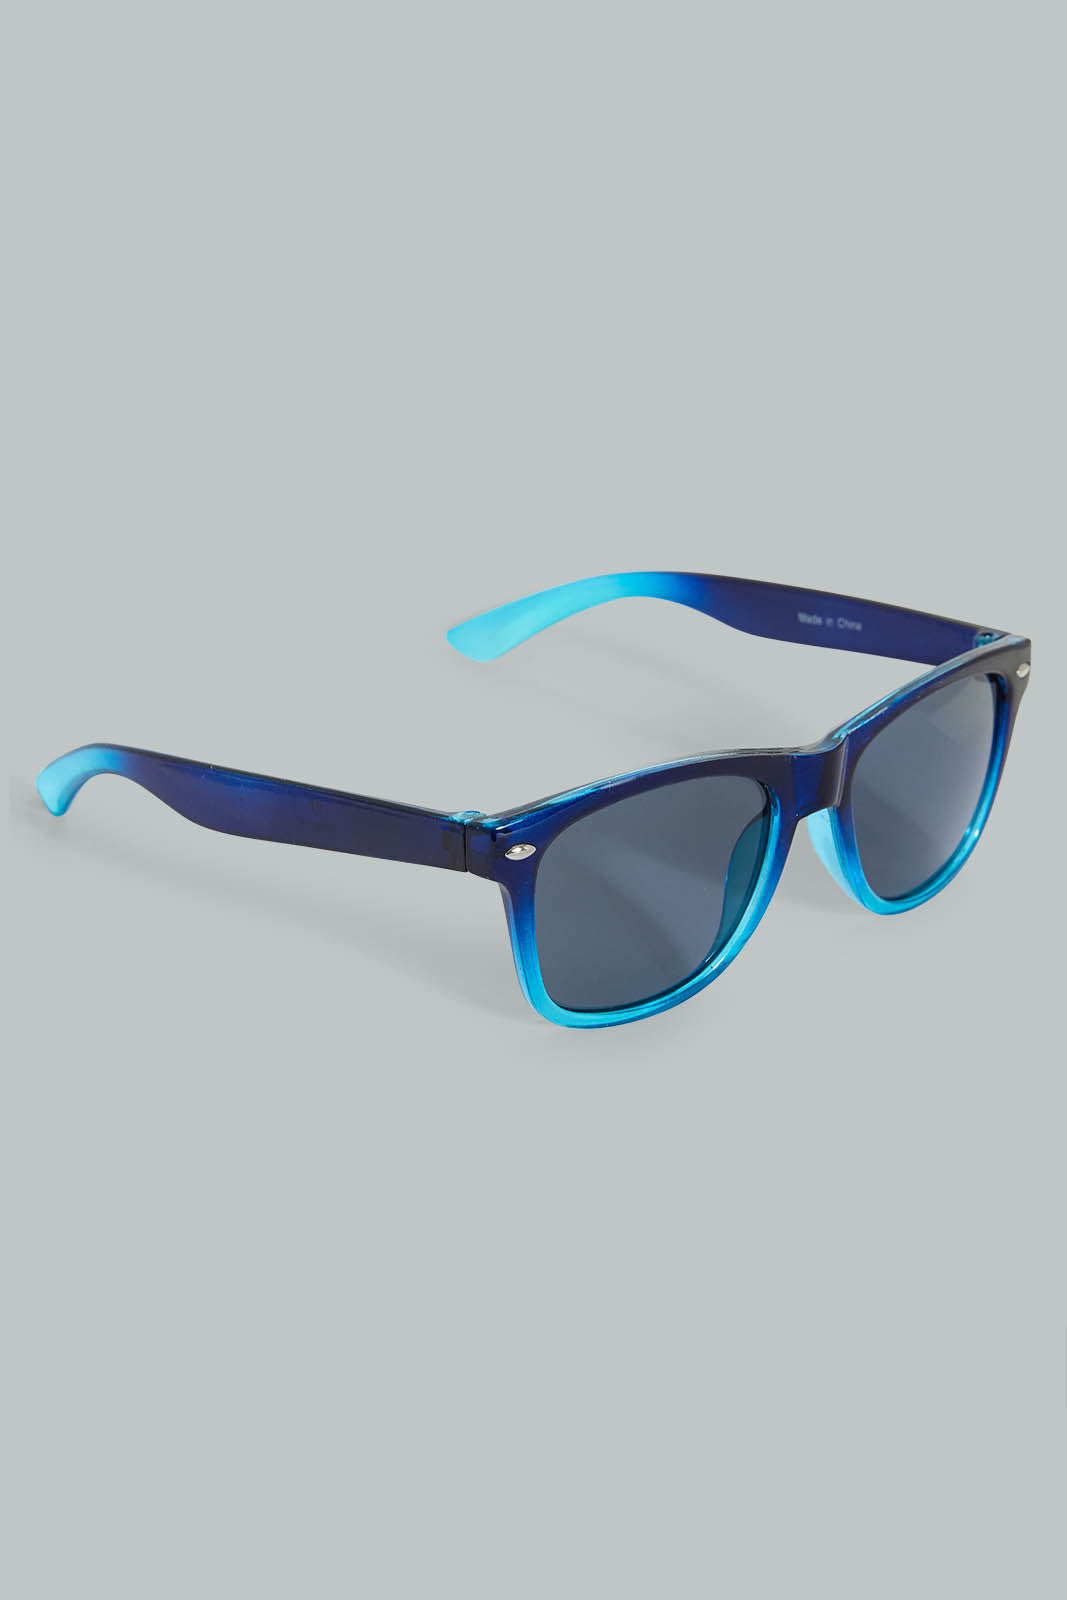 

Navy And Teal Wayfarer Sunglasses With Printed Case